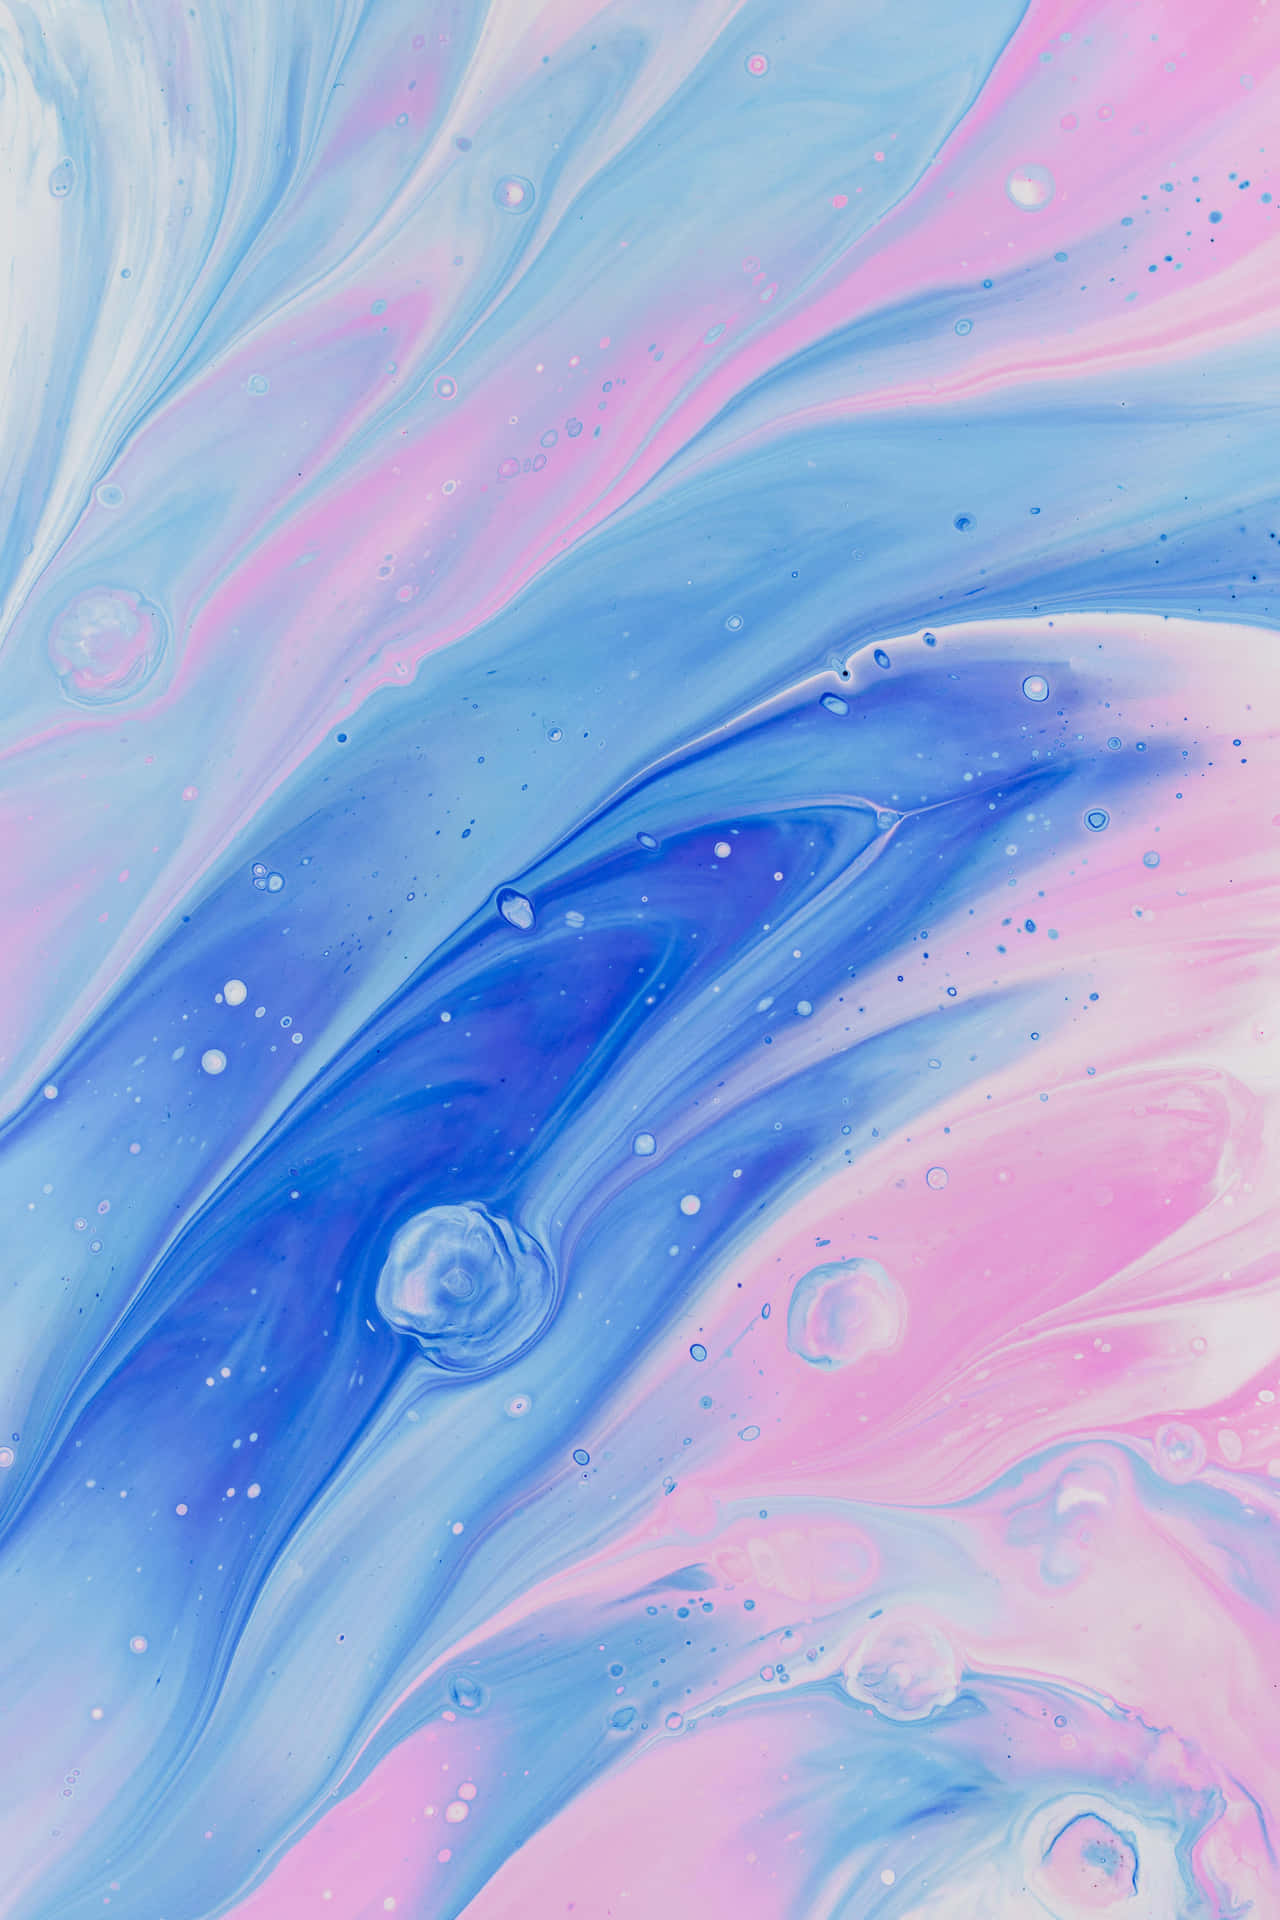 A Blue And Pink Swirling Liquid Background